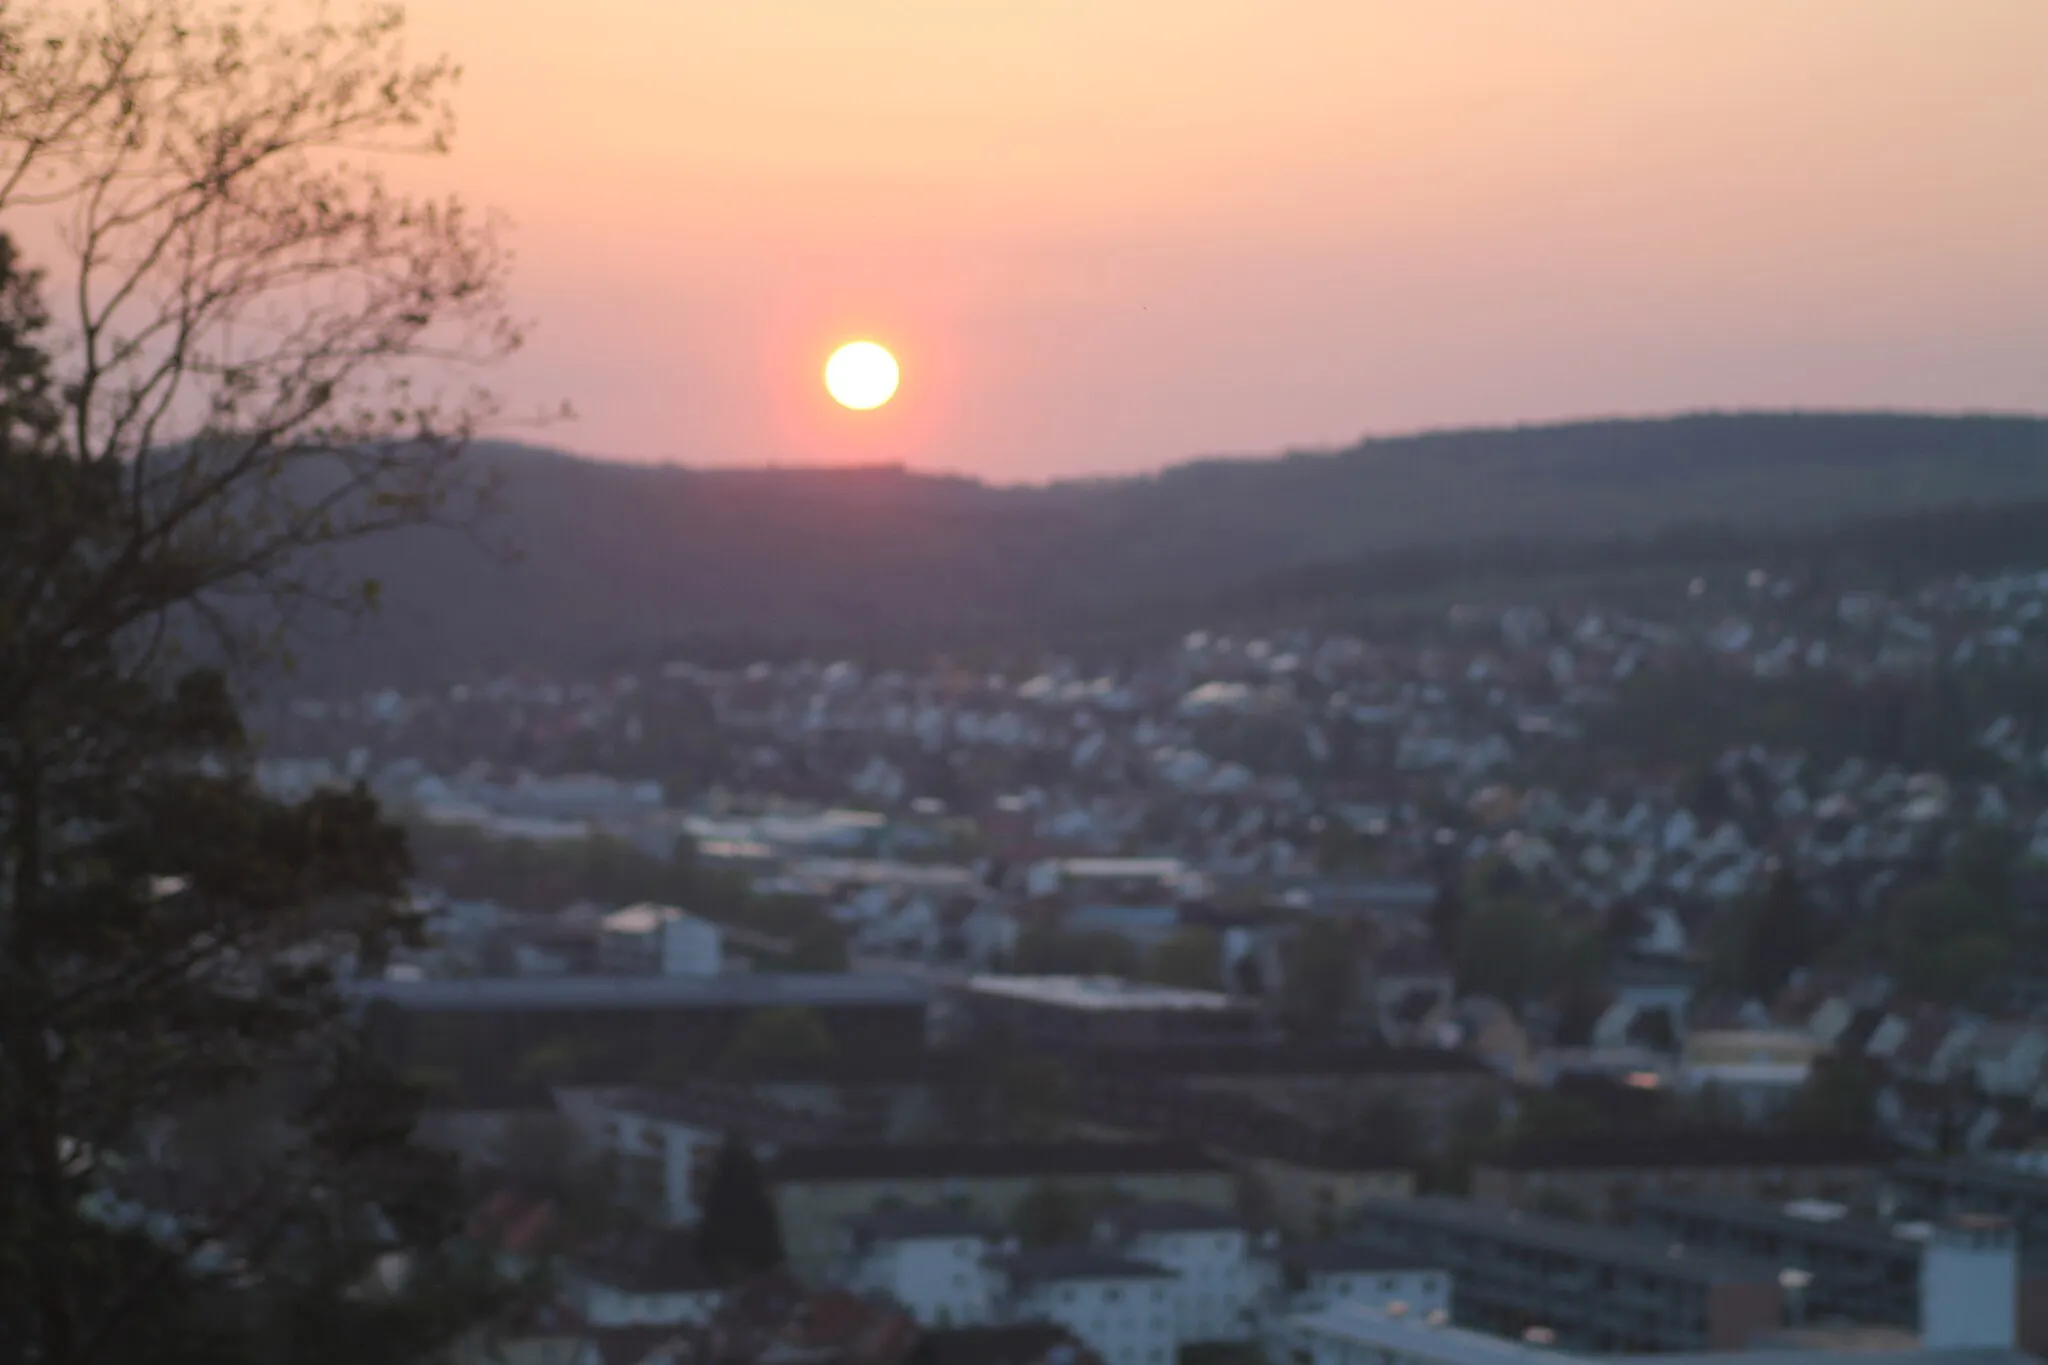 Photo showing: Sonnenuntergang, fotografiert von Schloss Hellenstein
Camera location 48° 40′ 31.29″ N, 10° 08′ 54.11″ E View this and other nearby images on: OpenStreetMap 48.675359;   10.148363